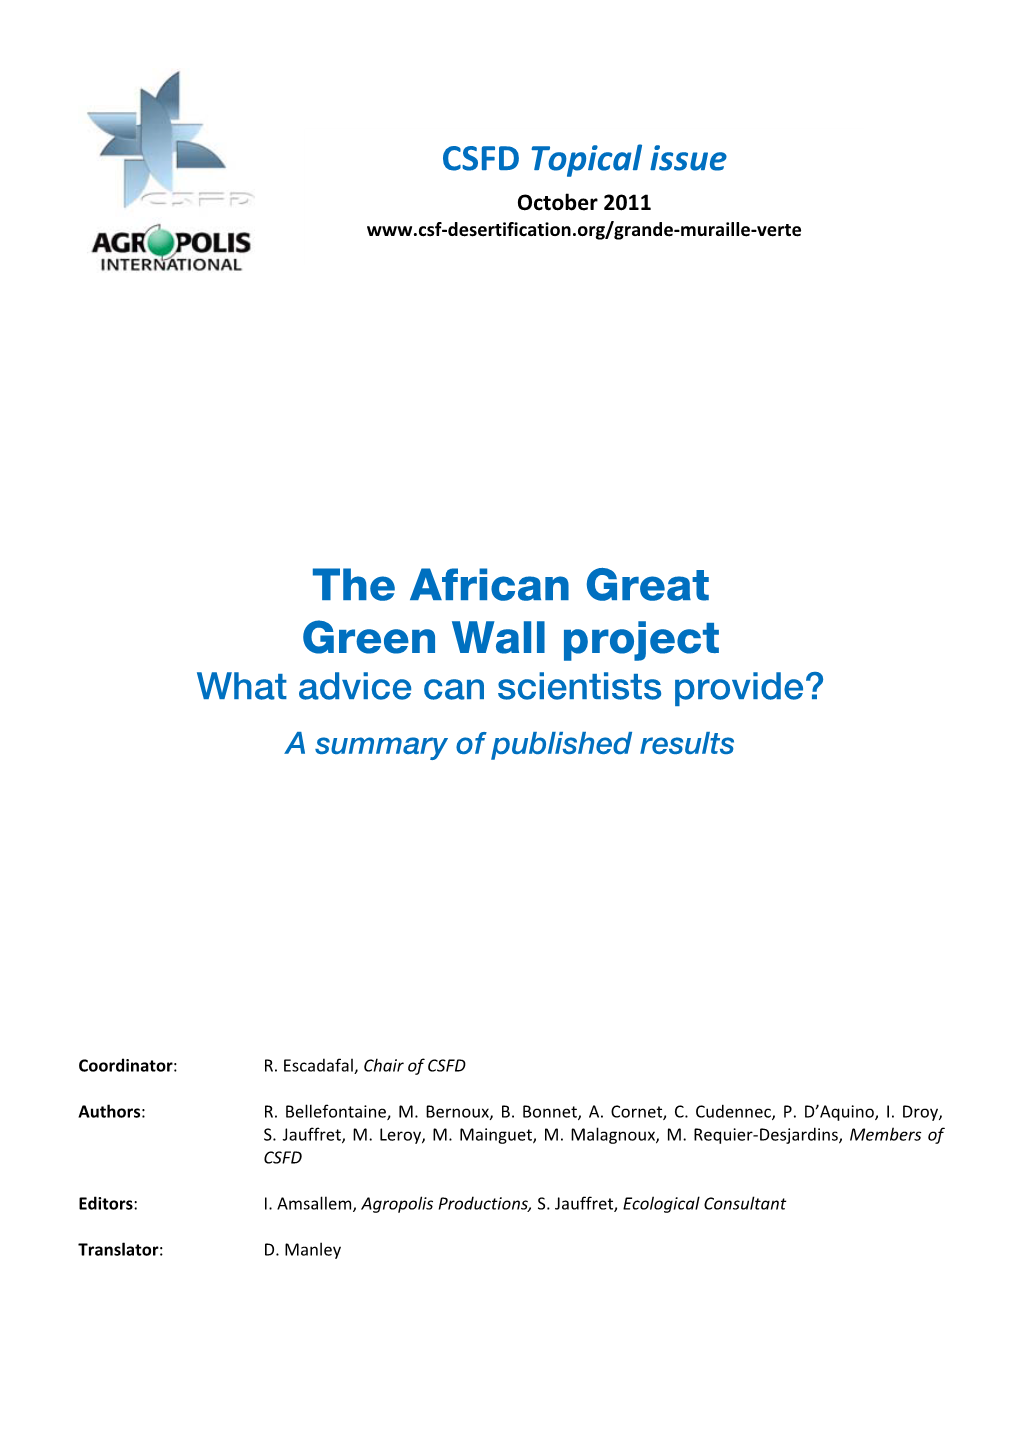 The African Great Green Wall Project What Advice Can Scientists Provide?